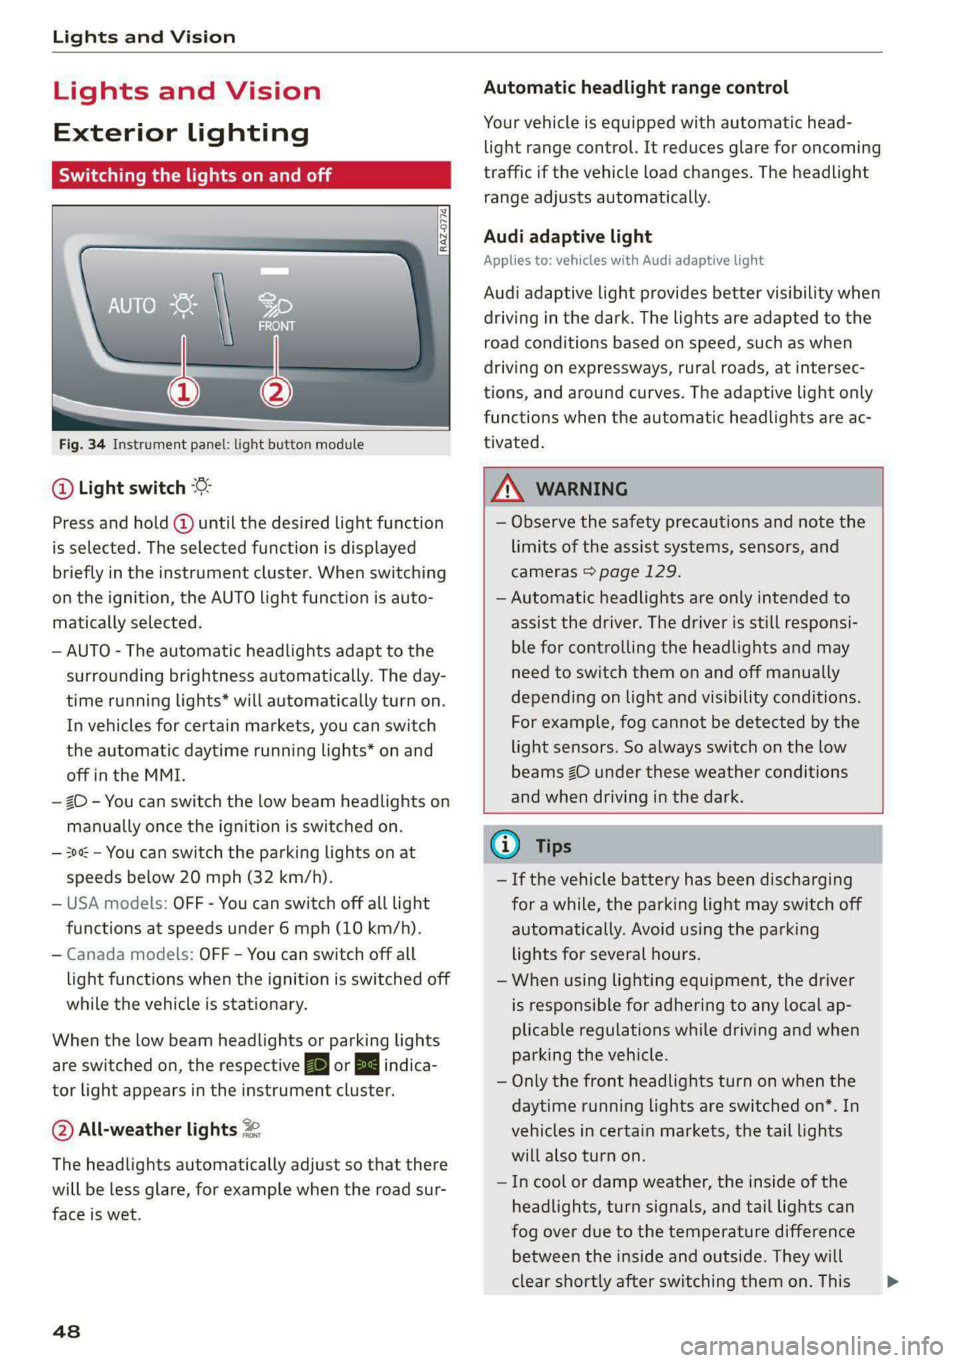 AUDI E-TRON 2021 Service Manual Lights and Vision 
  
Lights and Vision 
Exterior lighting 
Switching the lights on and off 
  
  
Fig. 34 Instrument panel: light button module 
@ Light switch & 
Press and hold @ until the desired l